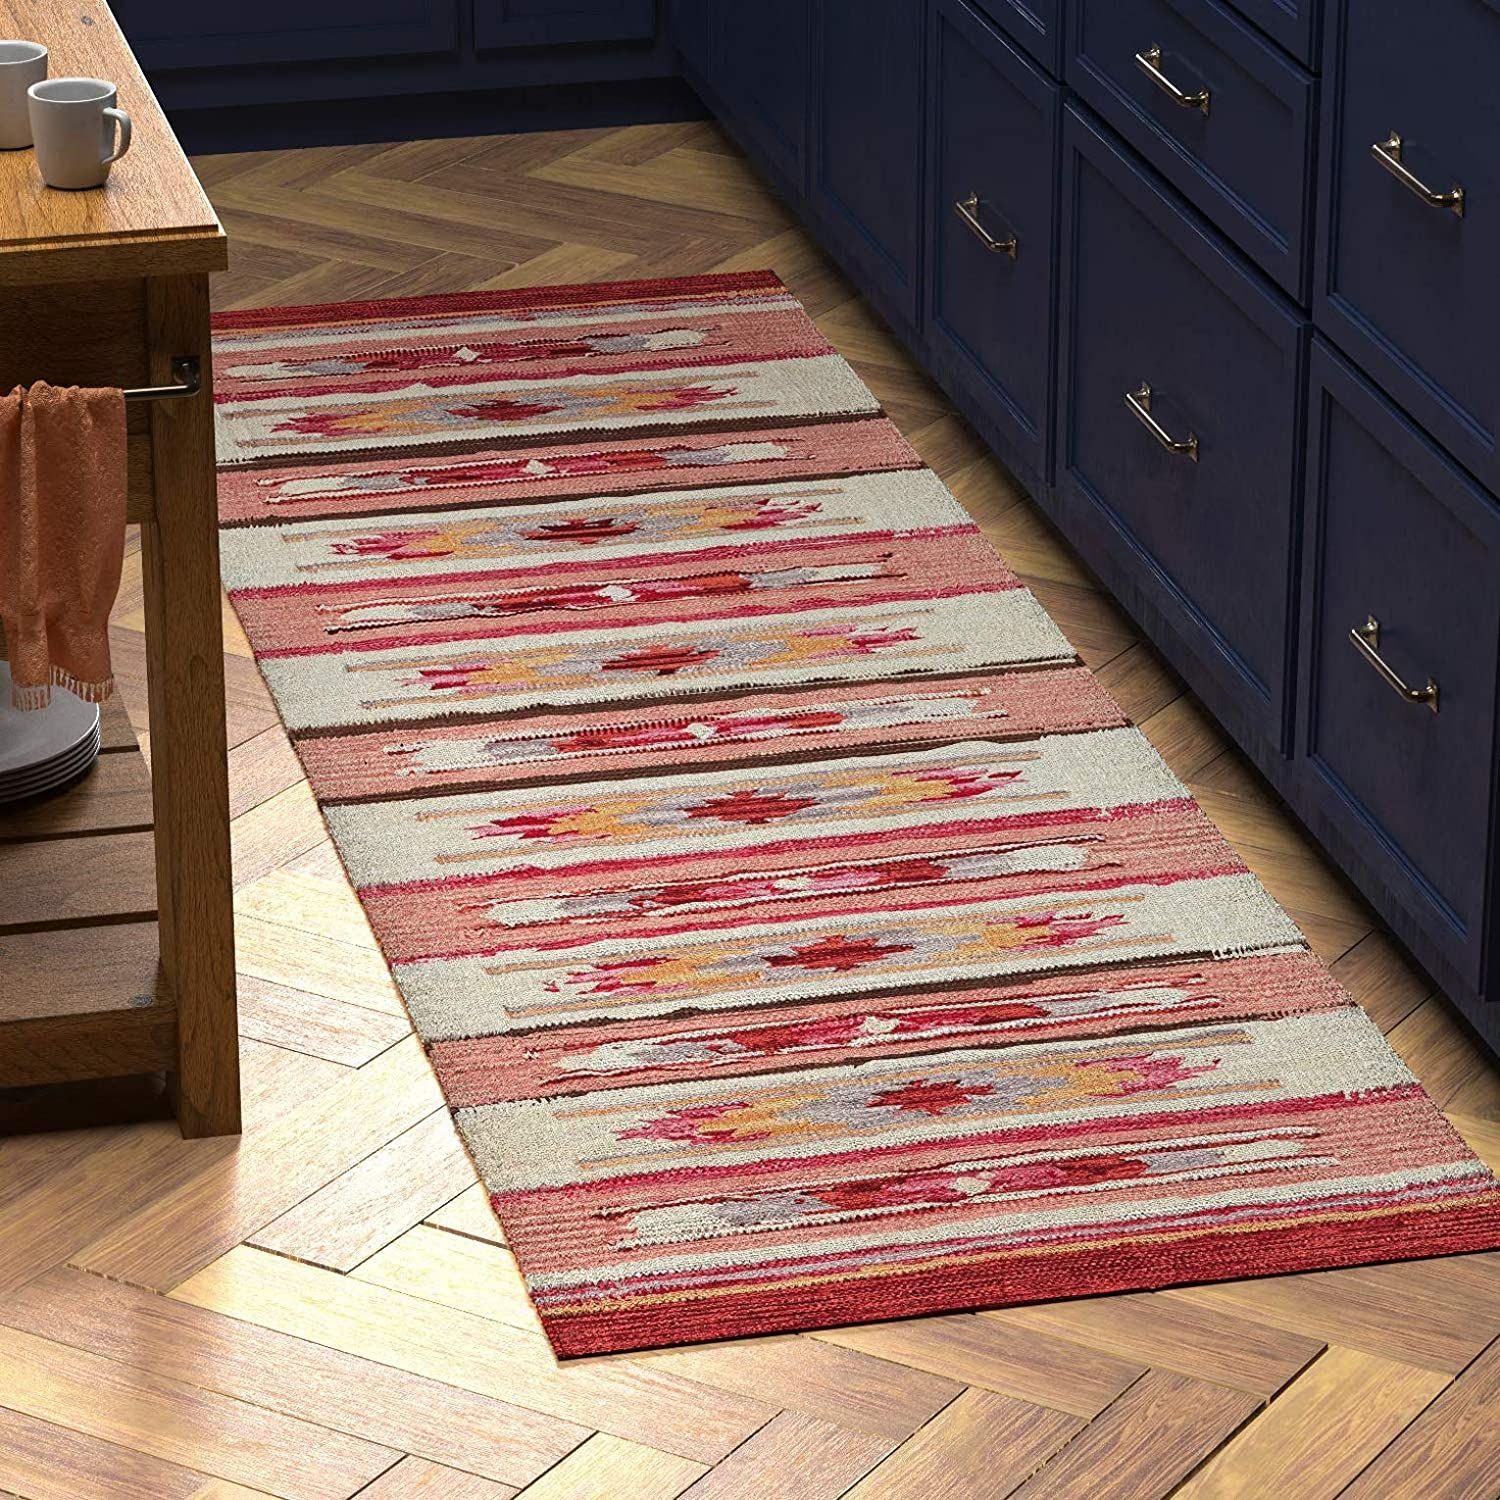 Stone & Beam Store Casual Geometric Kilim Cotton Runner Rug Throughout Cotton Runner Rugs (View 8 of 15)